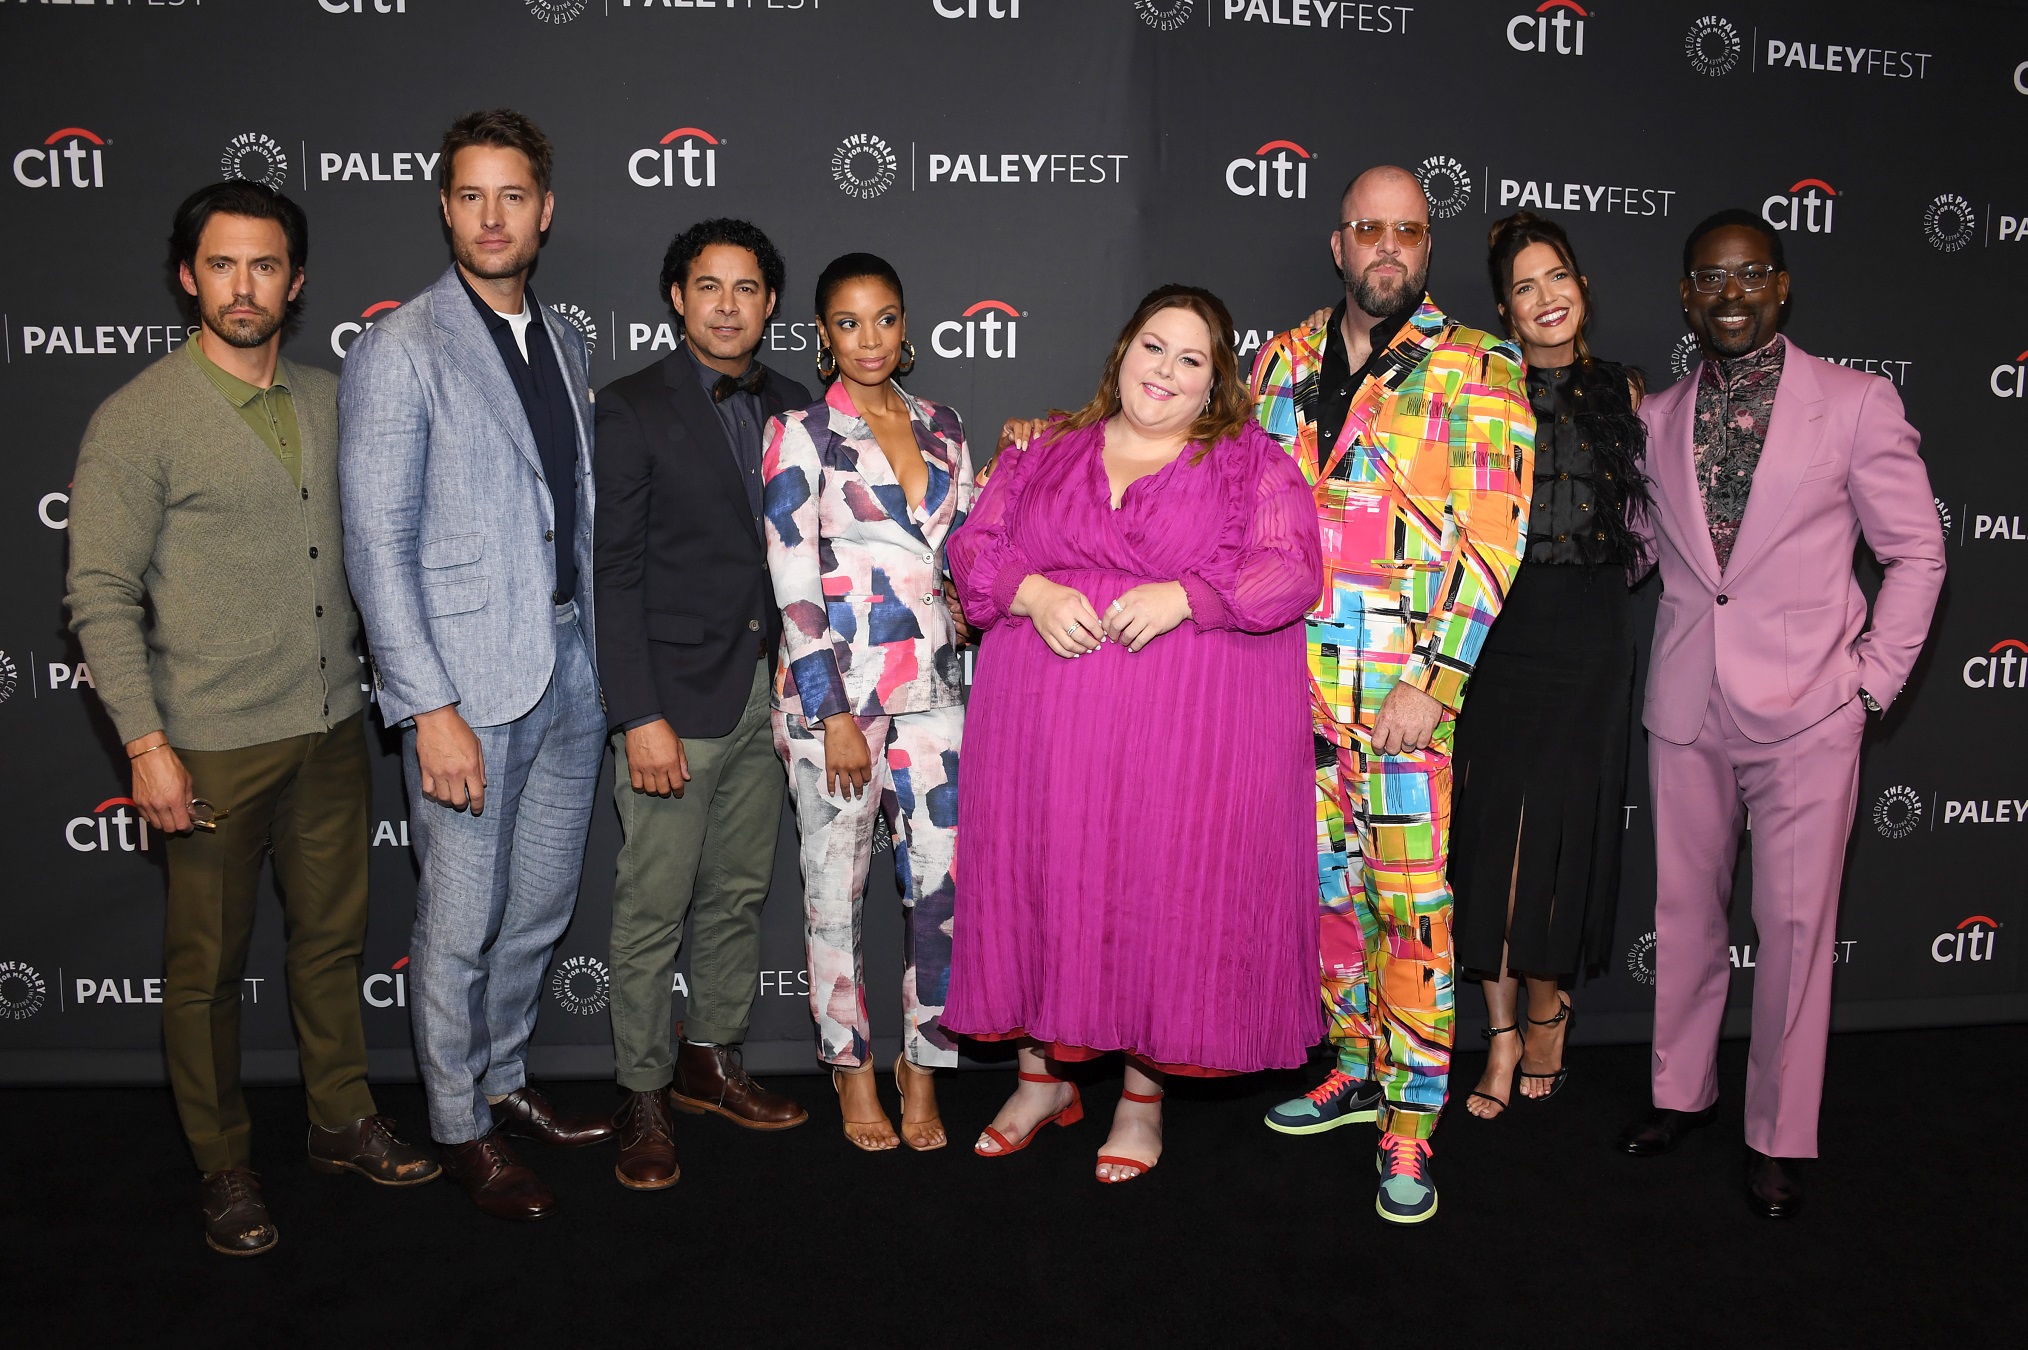 'This Is Us' Star Chris Sullivan on Kate & Toby's End and Revival Hopes